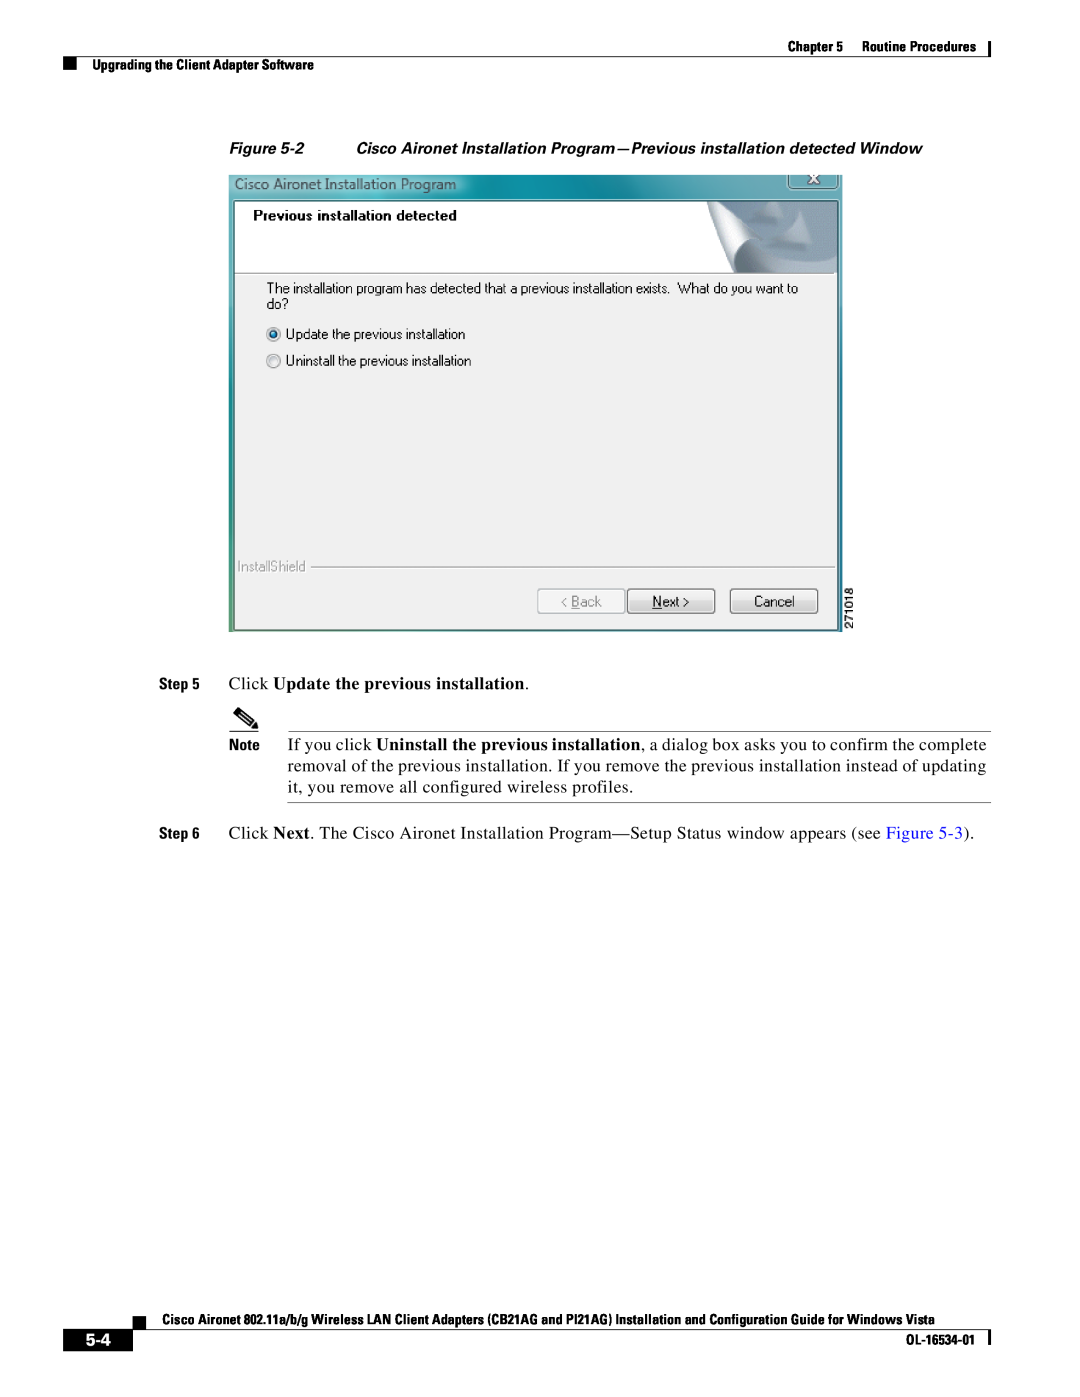 Cisco Systems PI21AG, CB21AG manual Click Update the previous installation 